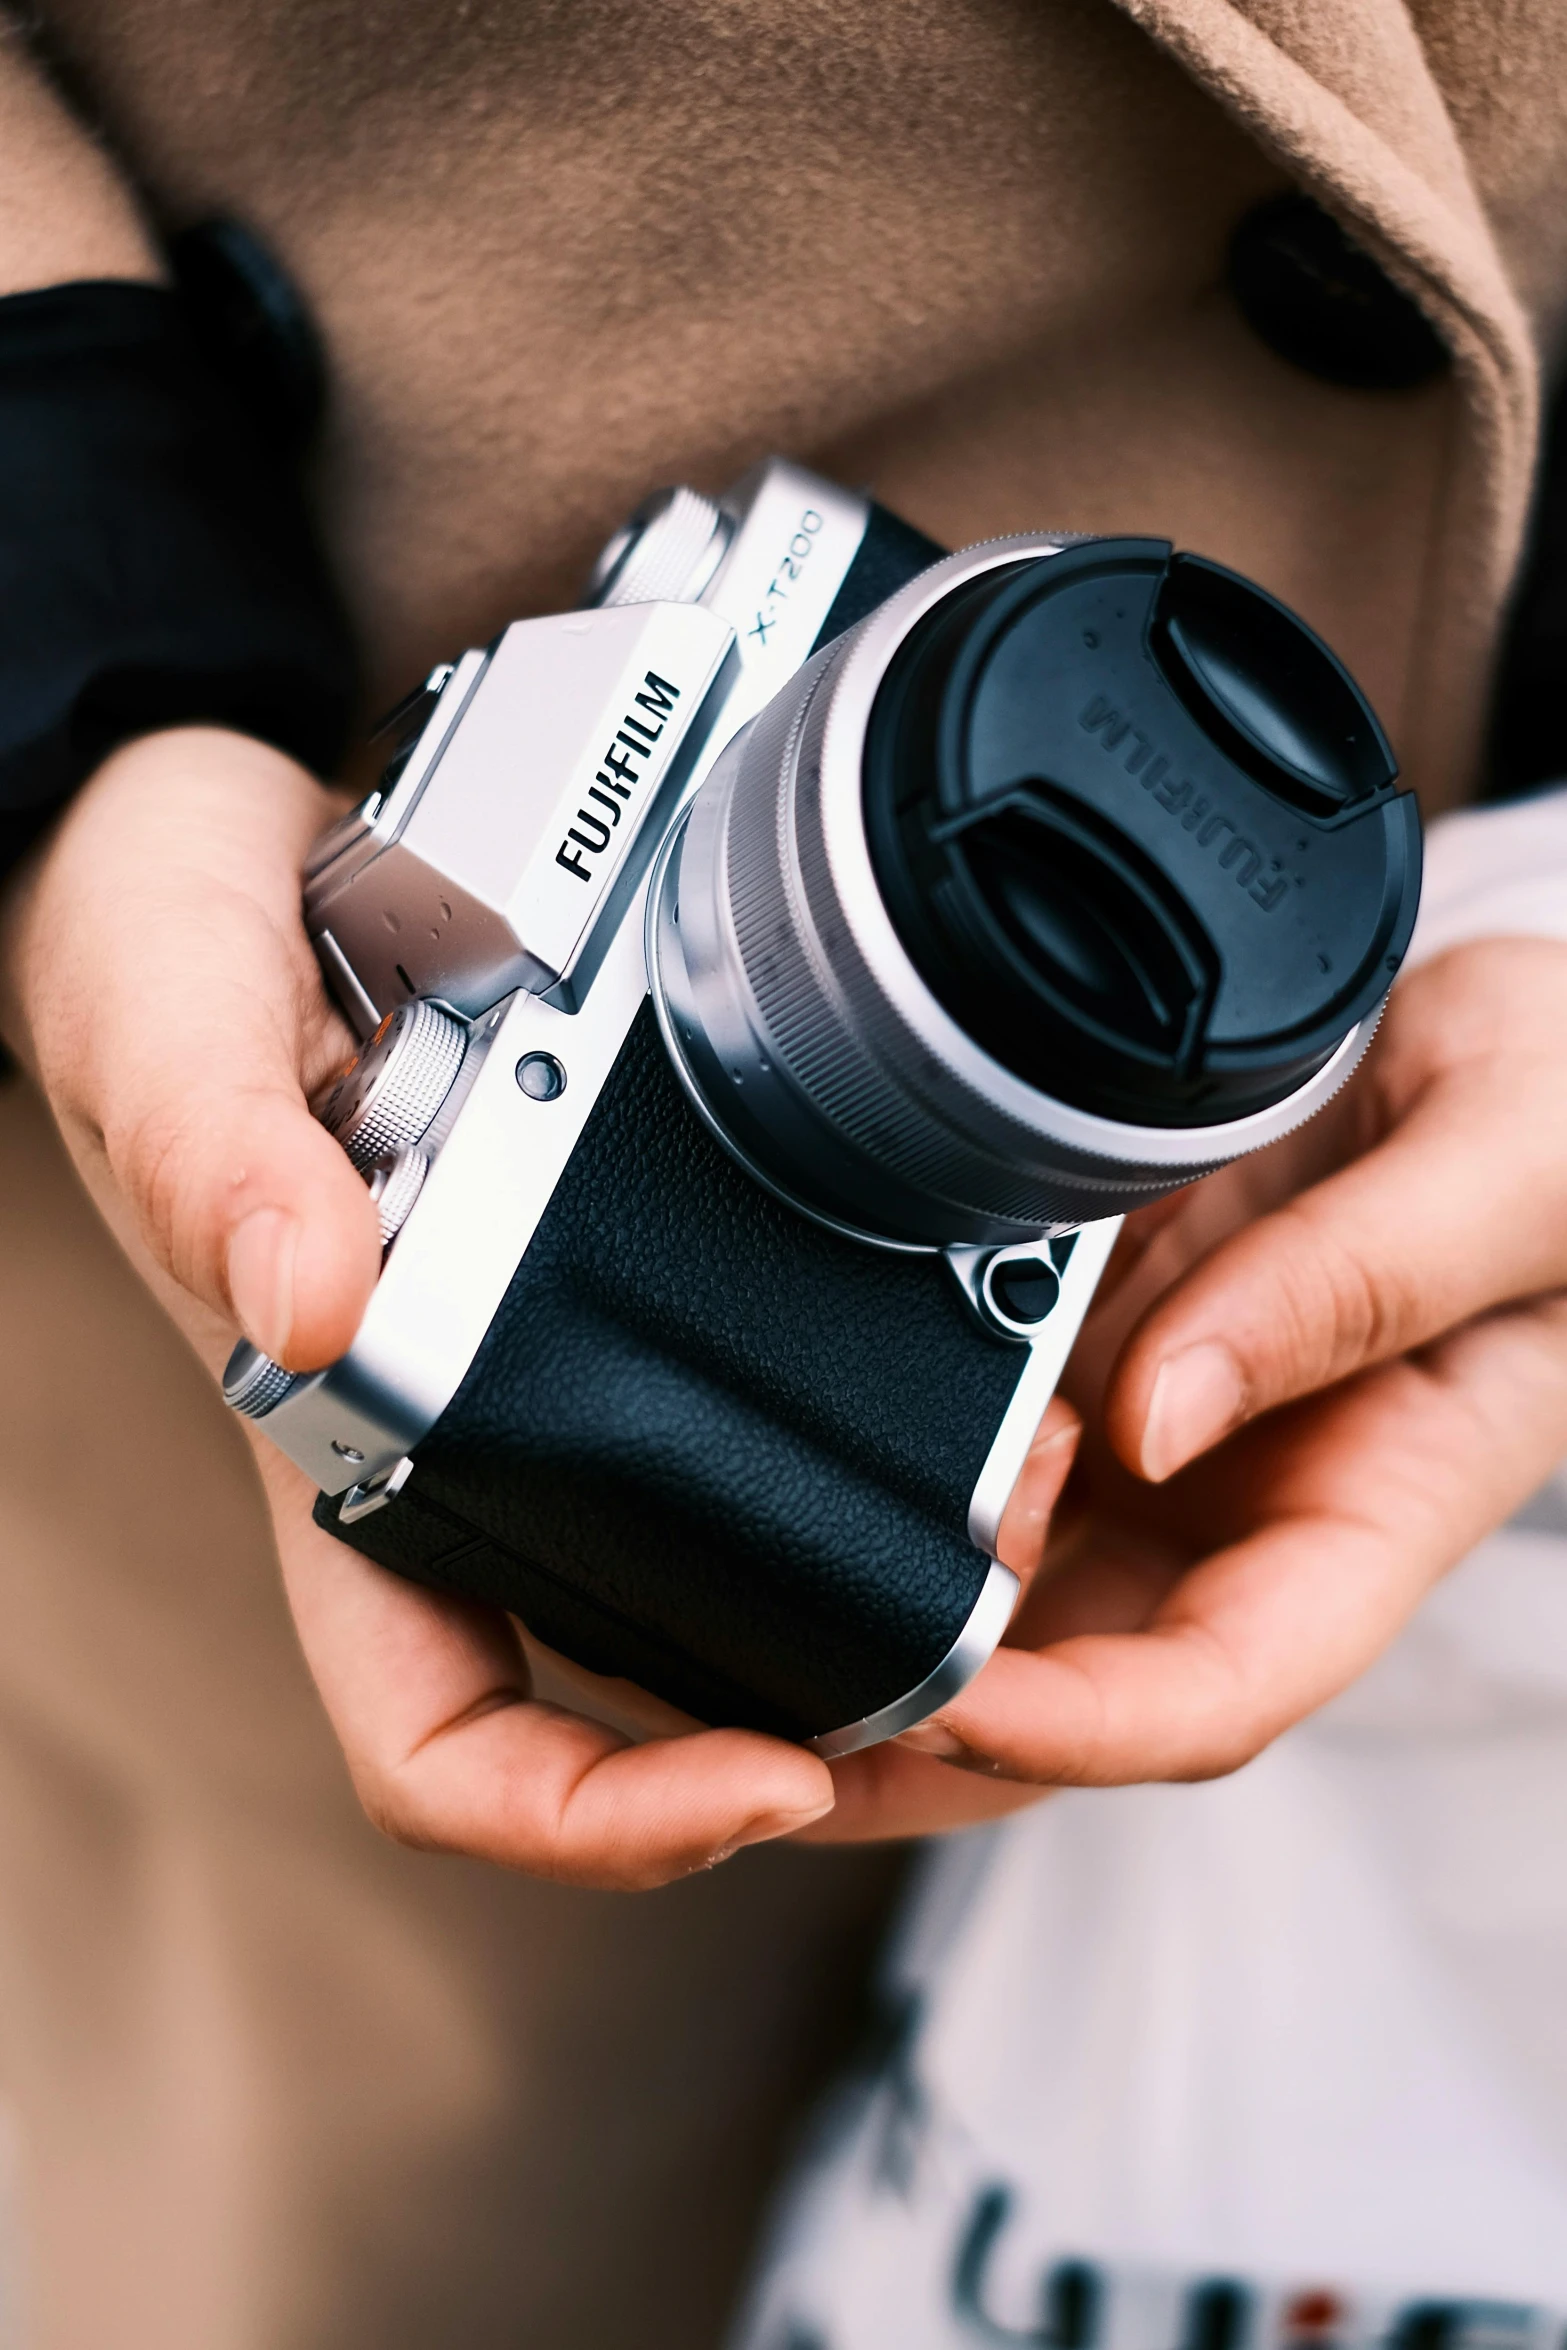 a person holds up a small camera